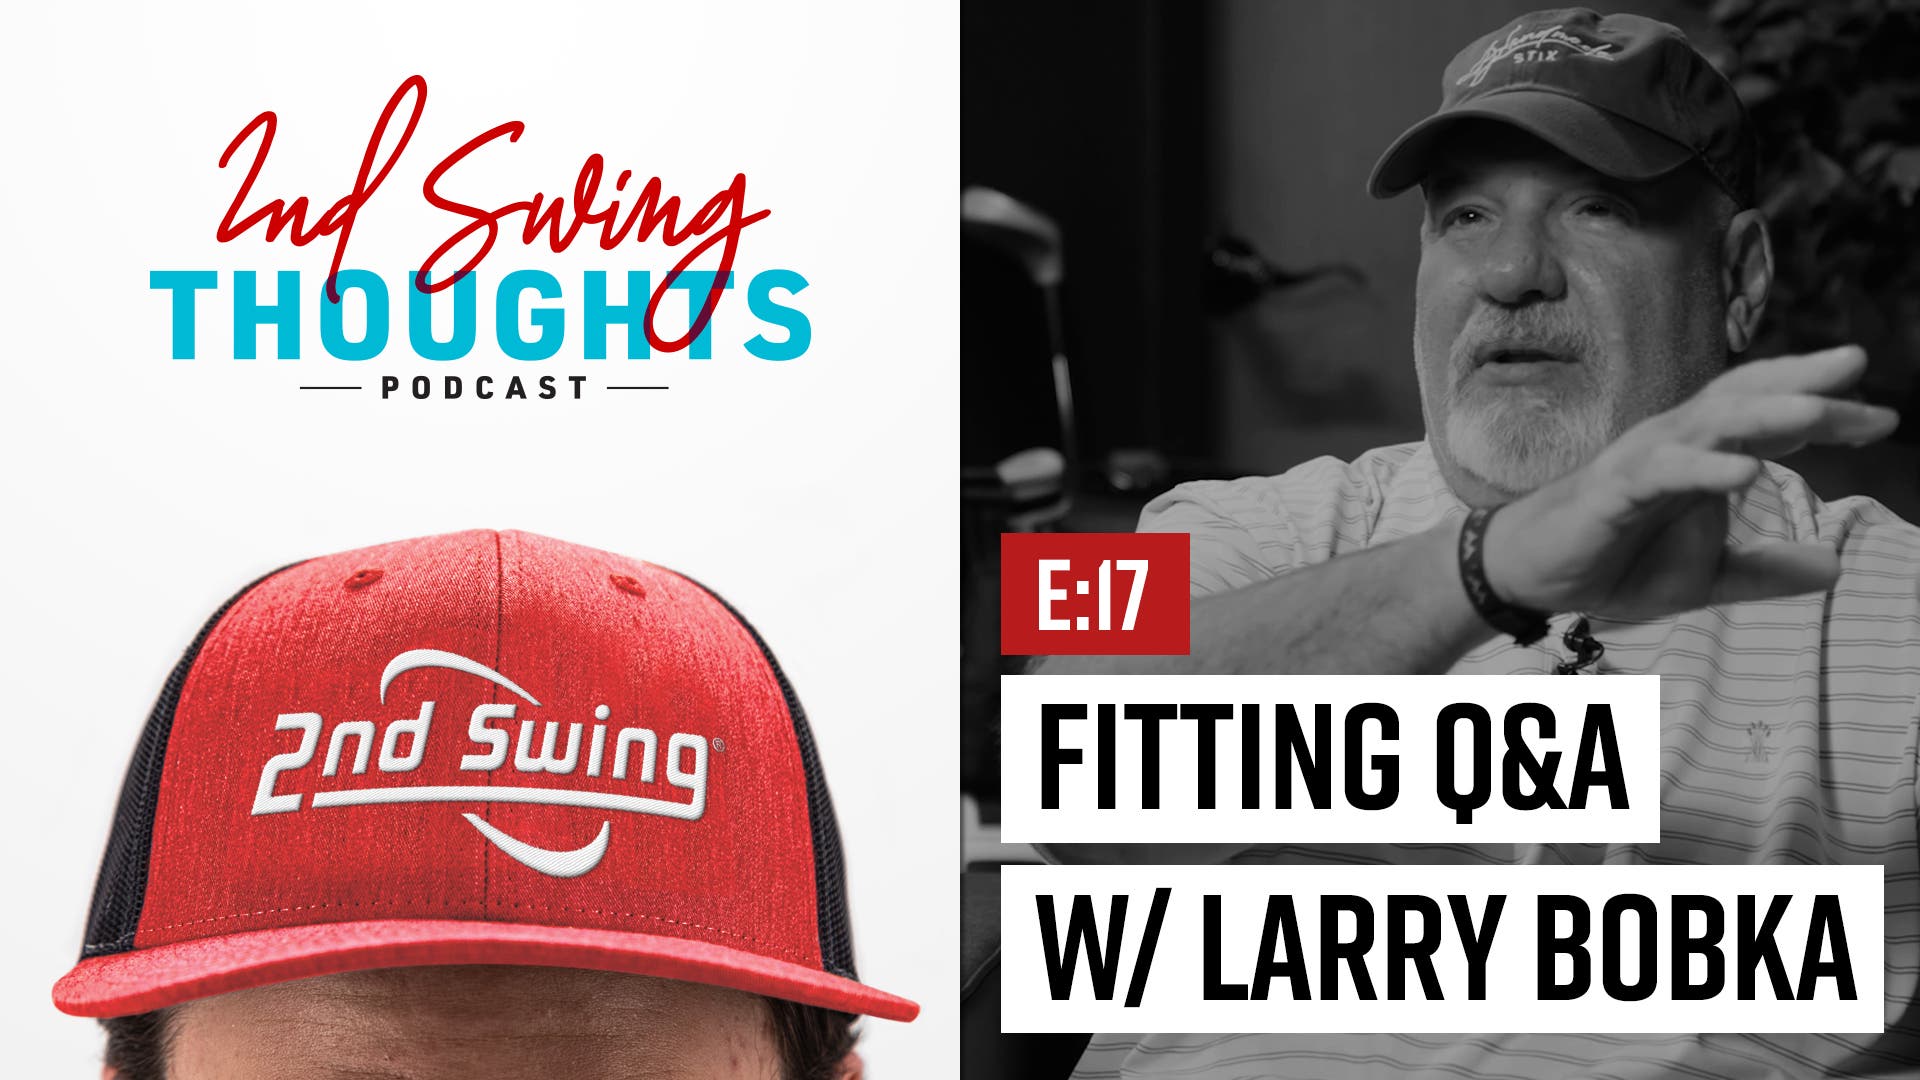 2nd Swing Thoughts | Episode 17: Fitting Q&A w/ Larry Bobka (Part 3)